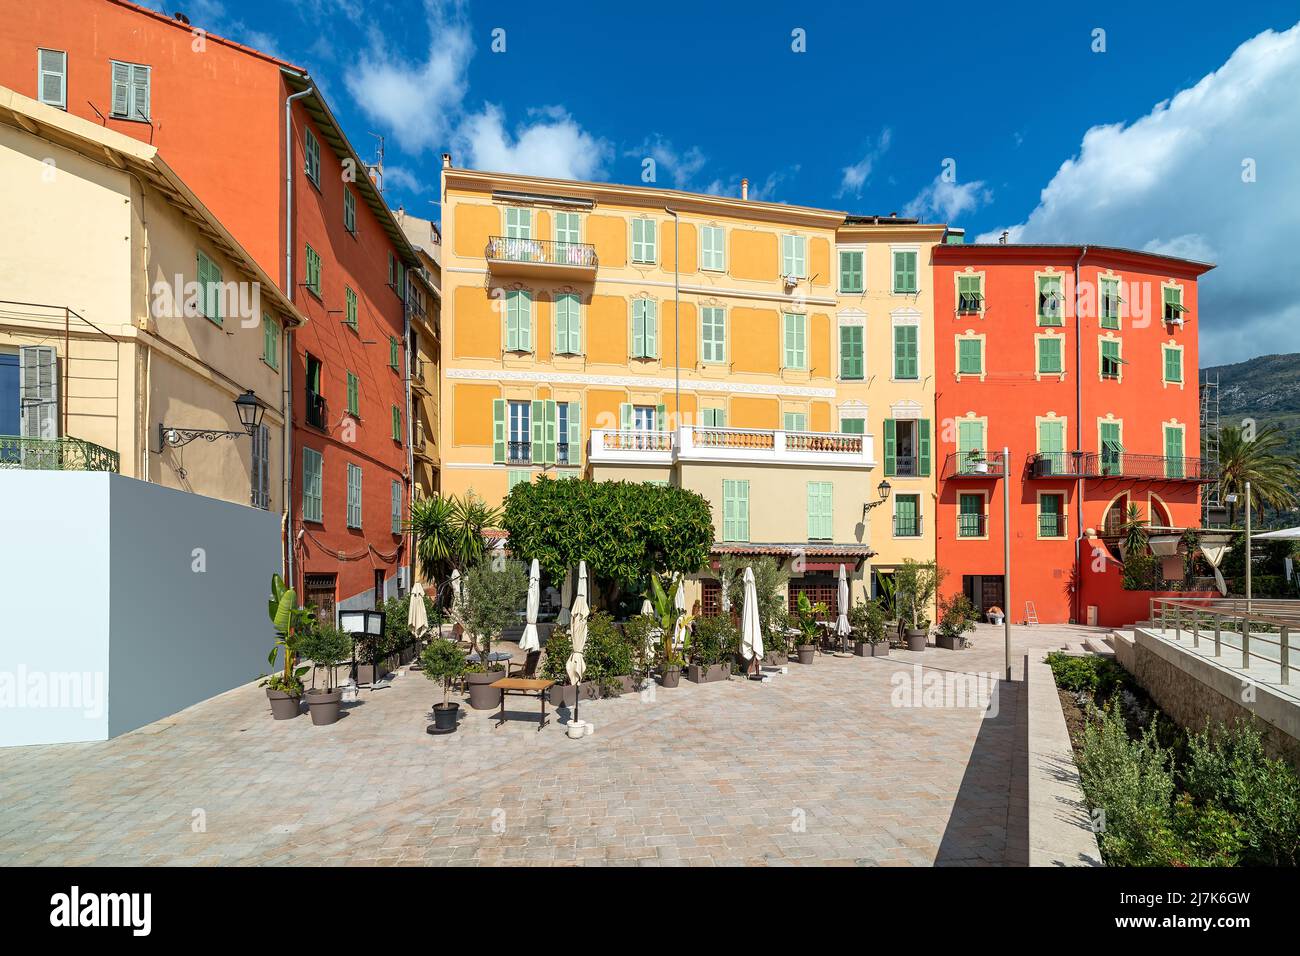 Small town square and colorful residential houses under blue sky in Menton, France. Stock Photo